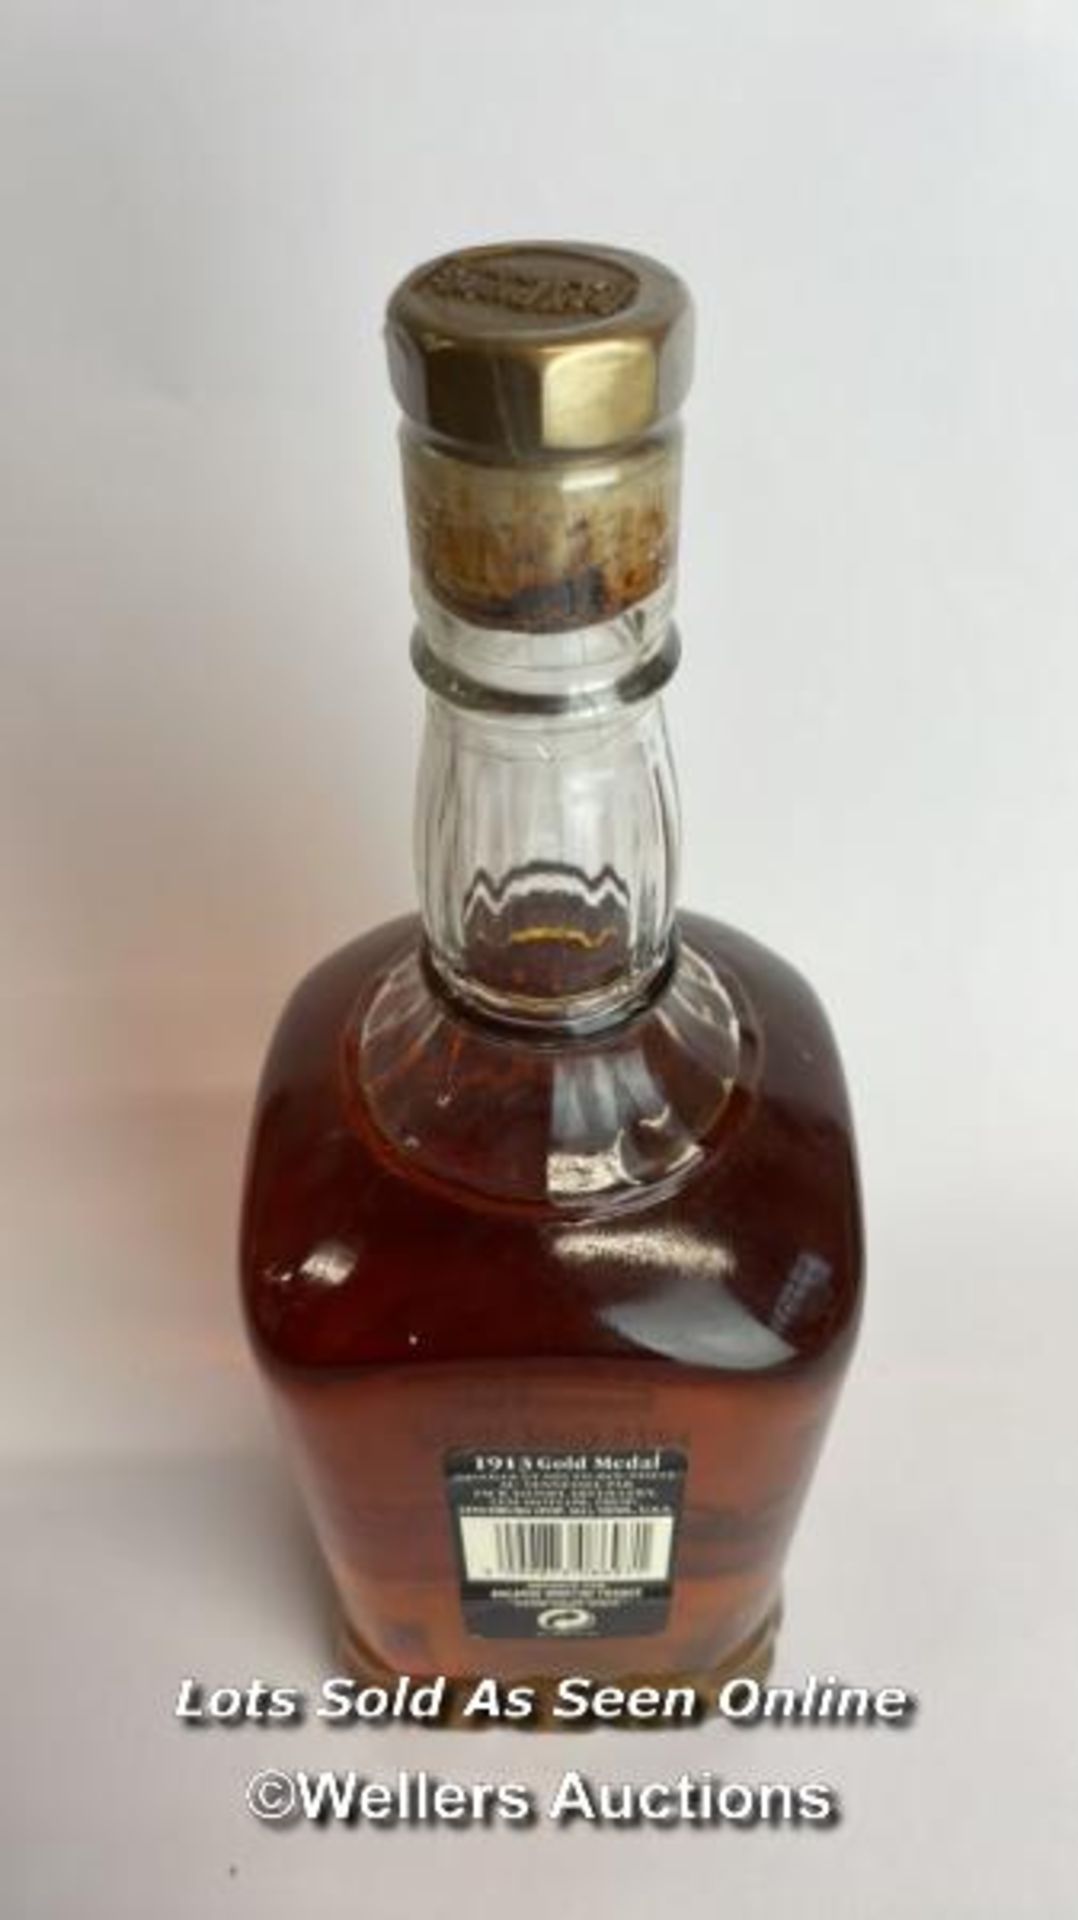 1913 Jack Daniels Tennesse Whiskey Gold Medal, 75cl, 43% vol / Please see images for fill level - Image 5 of 6